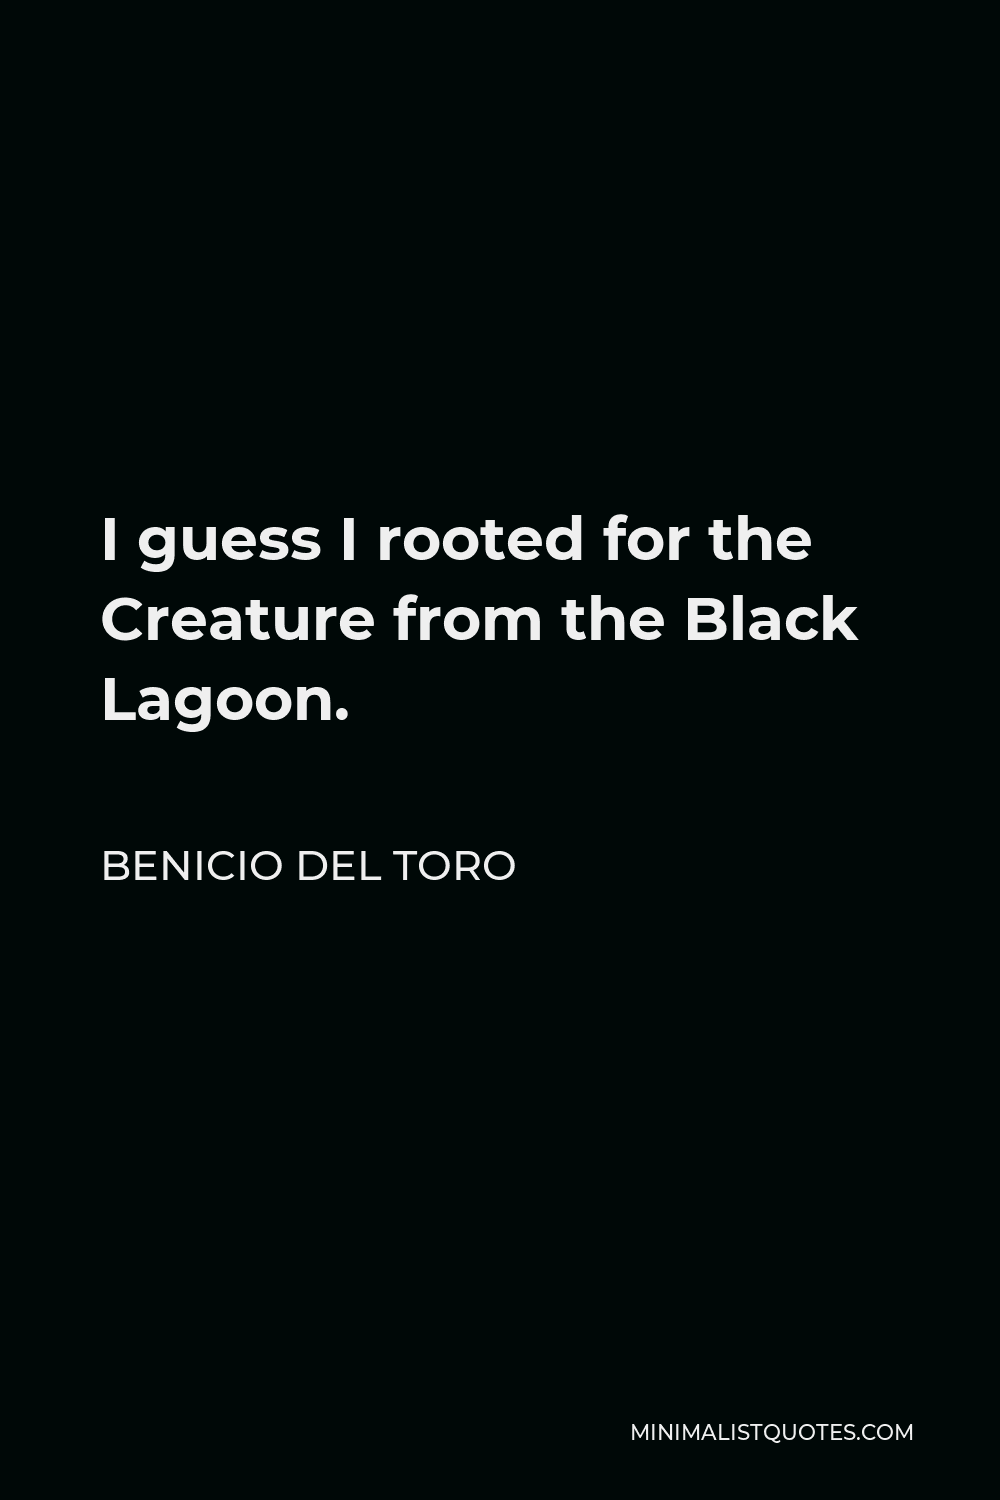 Benicio Del Toro Quote - I guess I rooted for the Creature from the Black Lagoon.